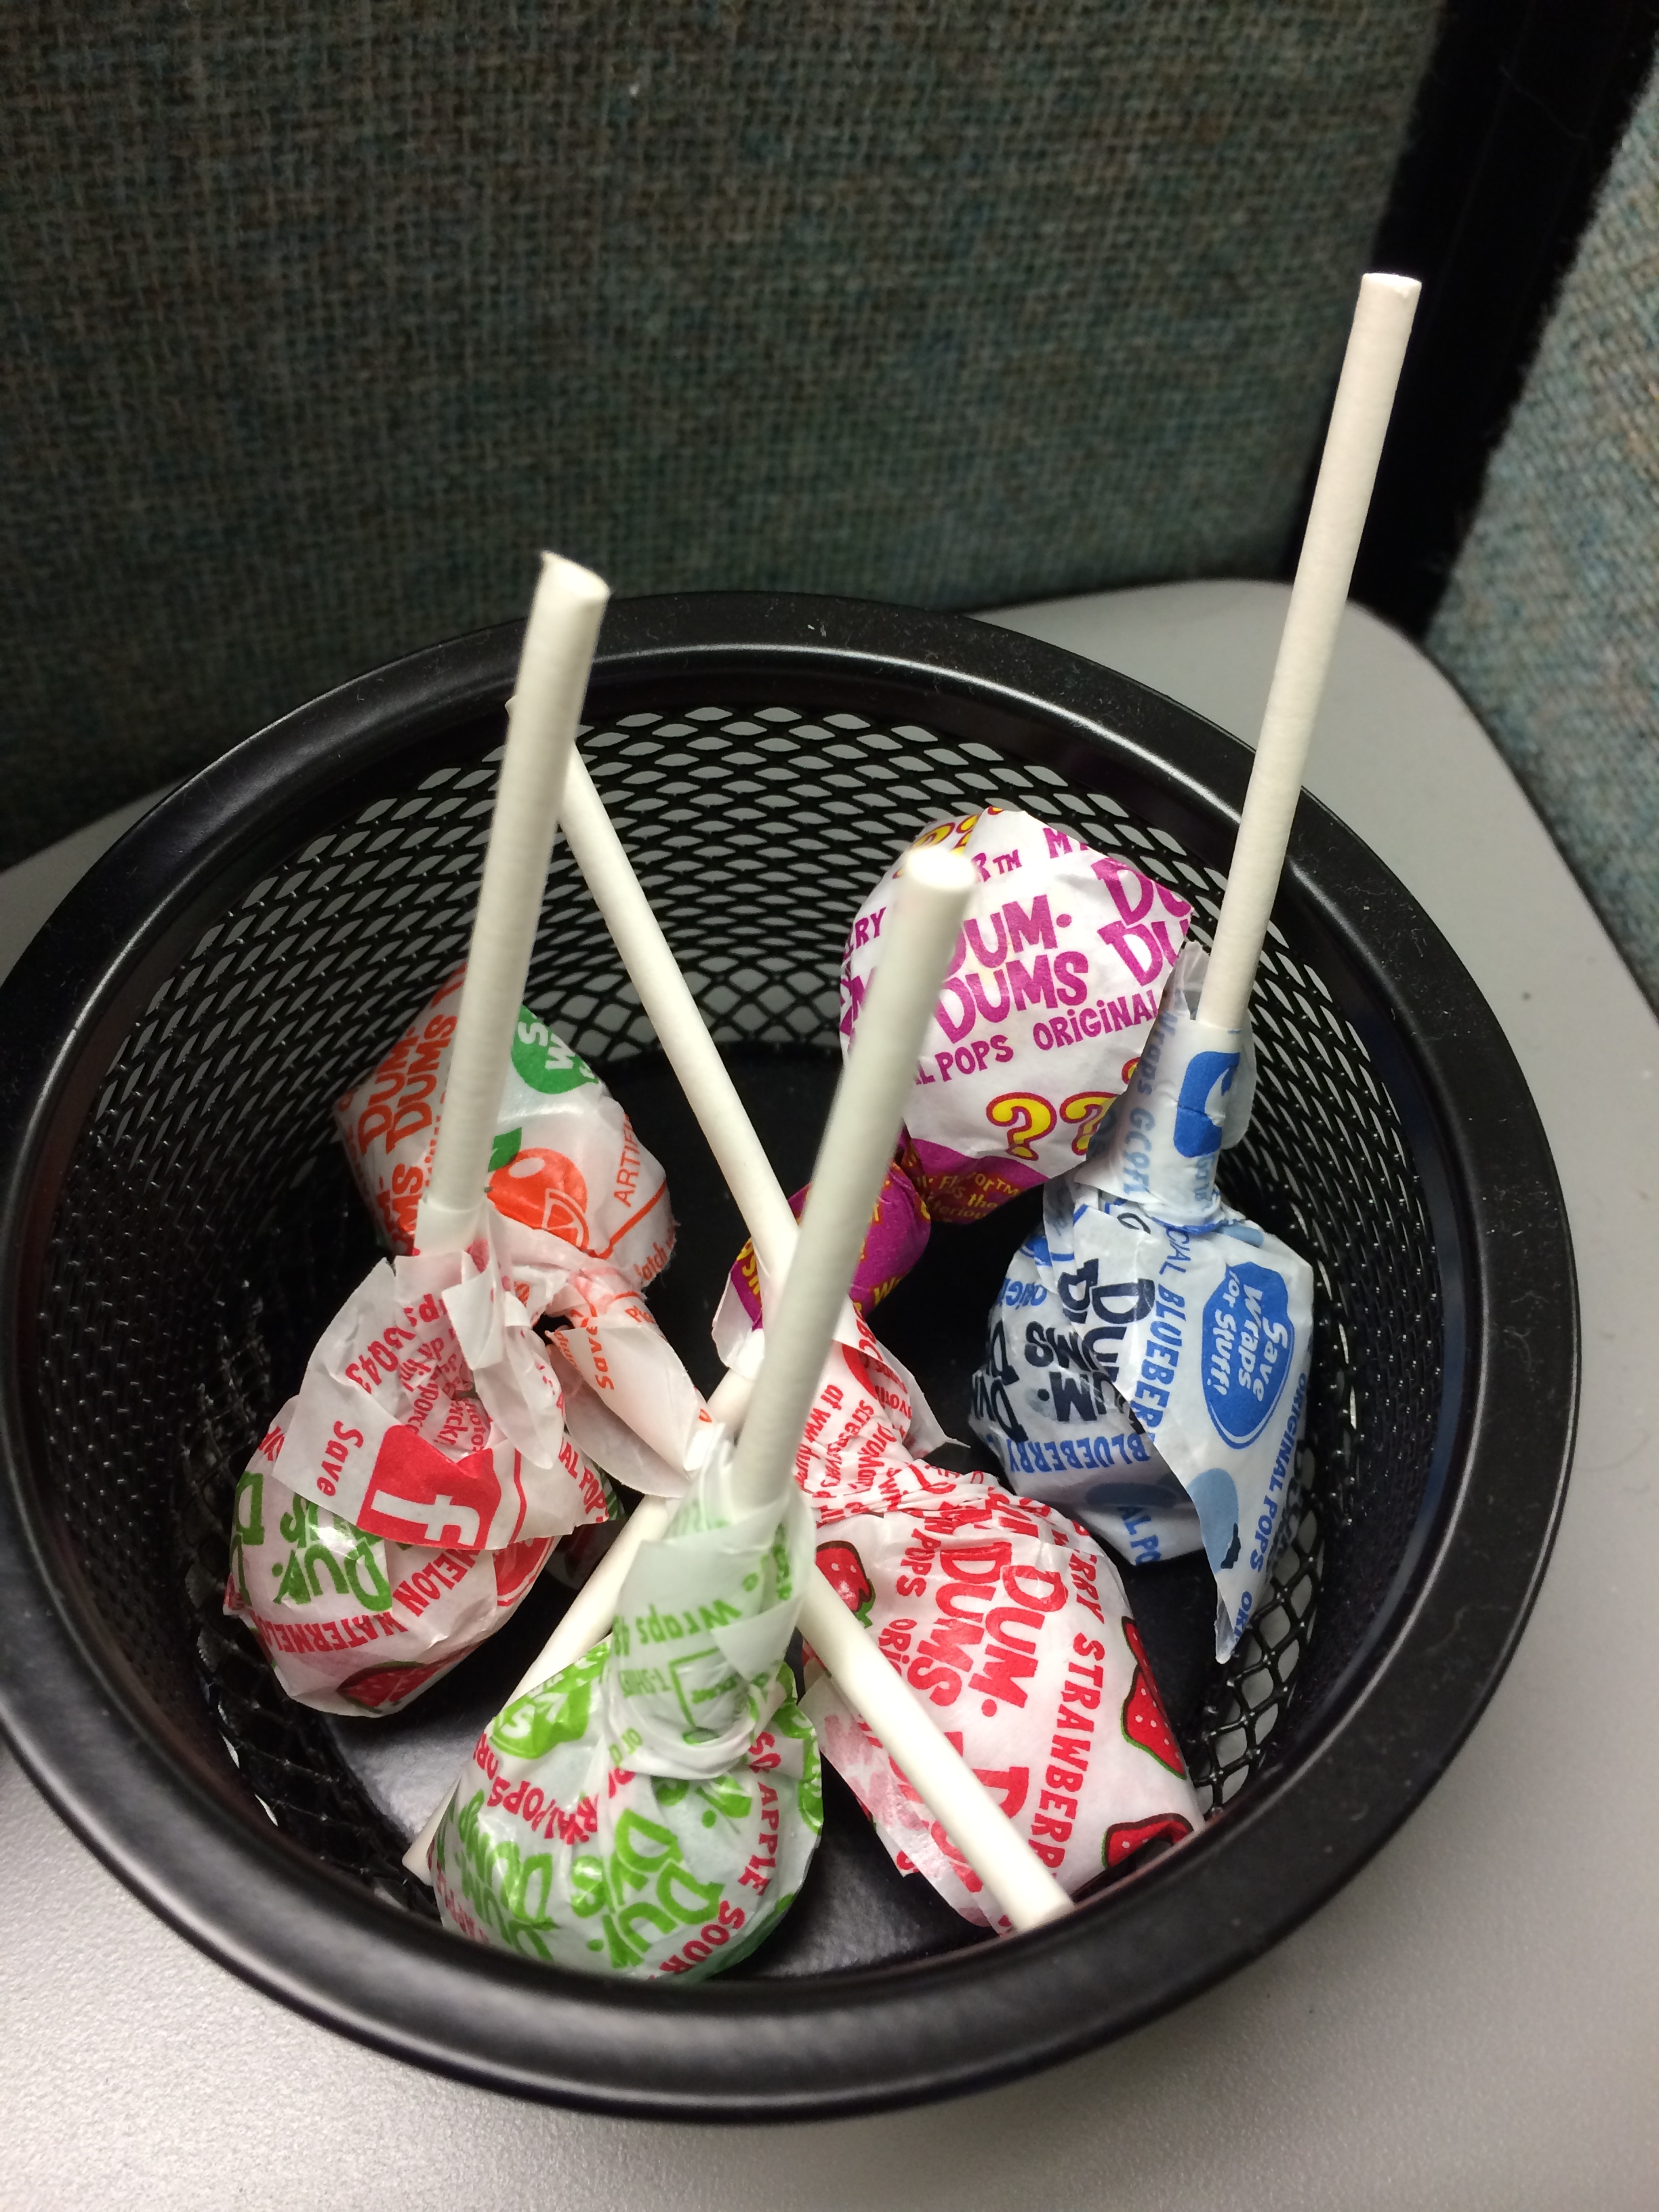 These are the Dum Dums on my desk that Joanna gave me.